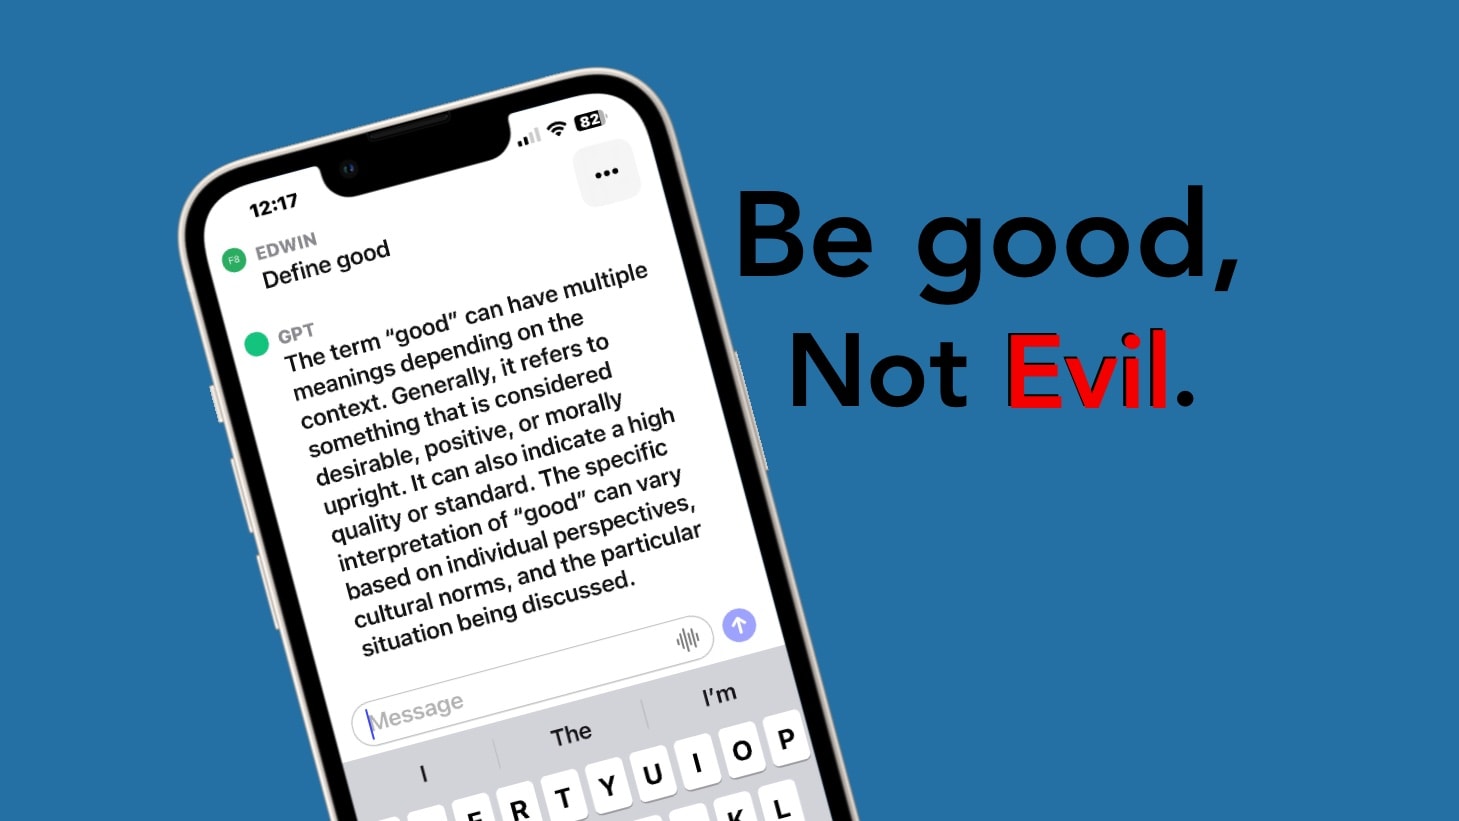 How to use ChatGPT on iPhone for good, not evil